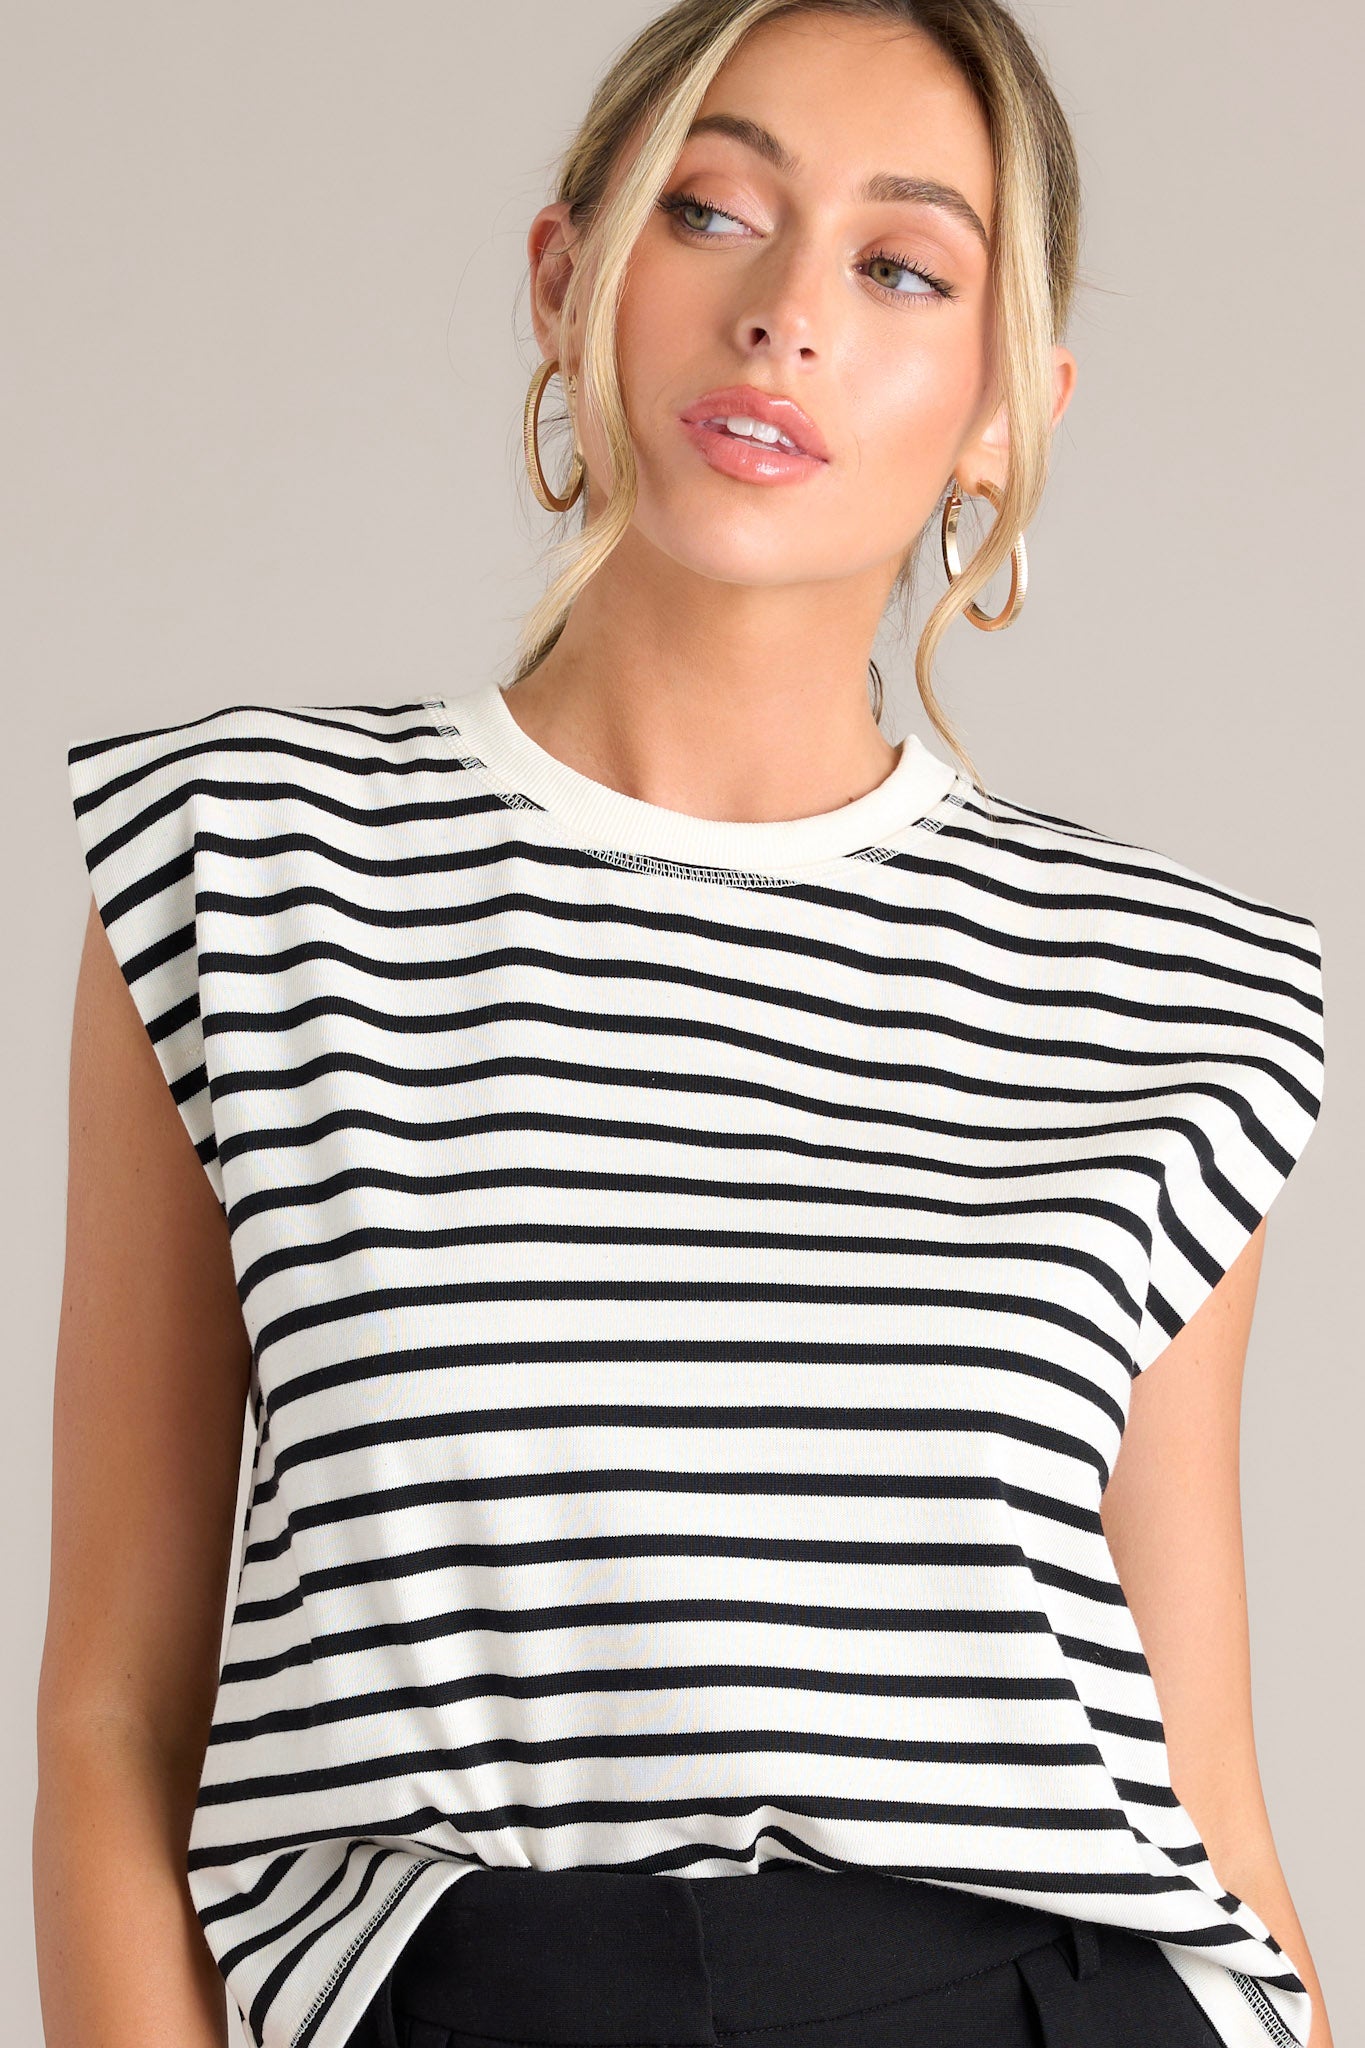 This white stripe top features a crew neckline, short cap sleeves, and a classic stripe pattern.